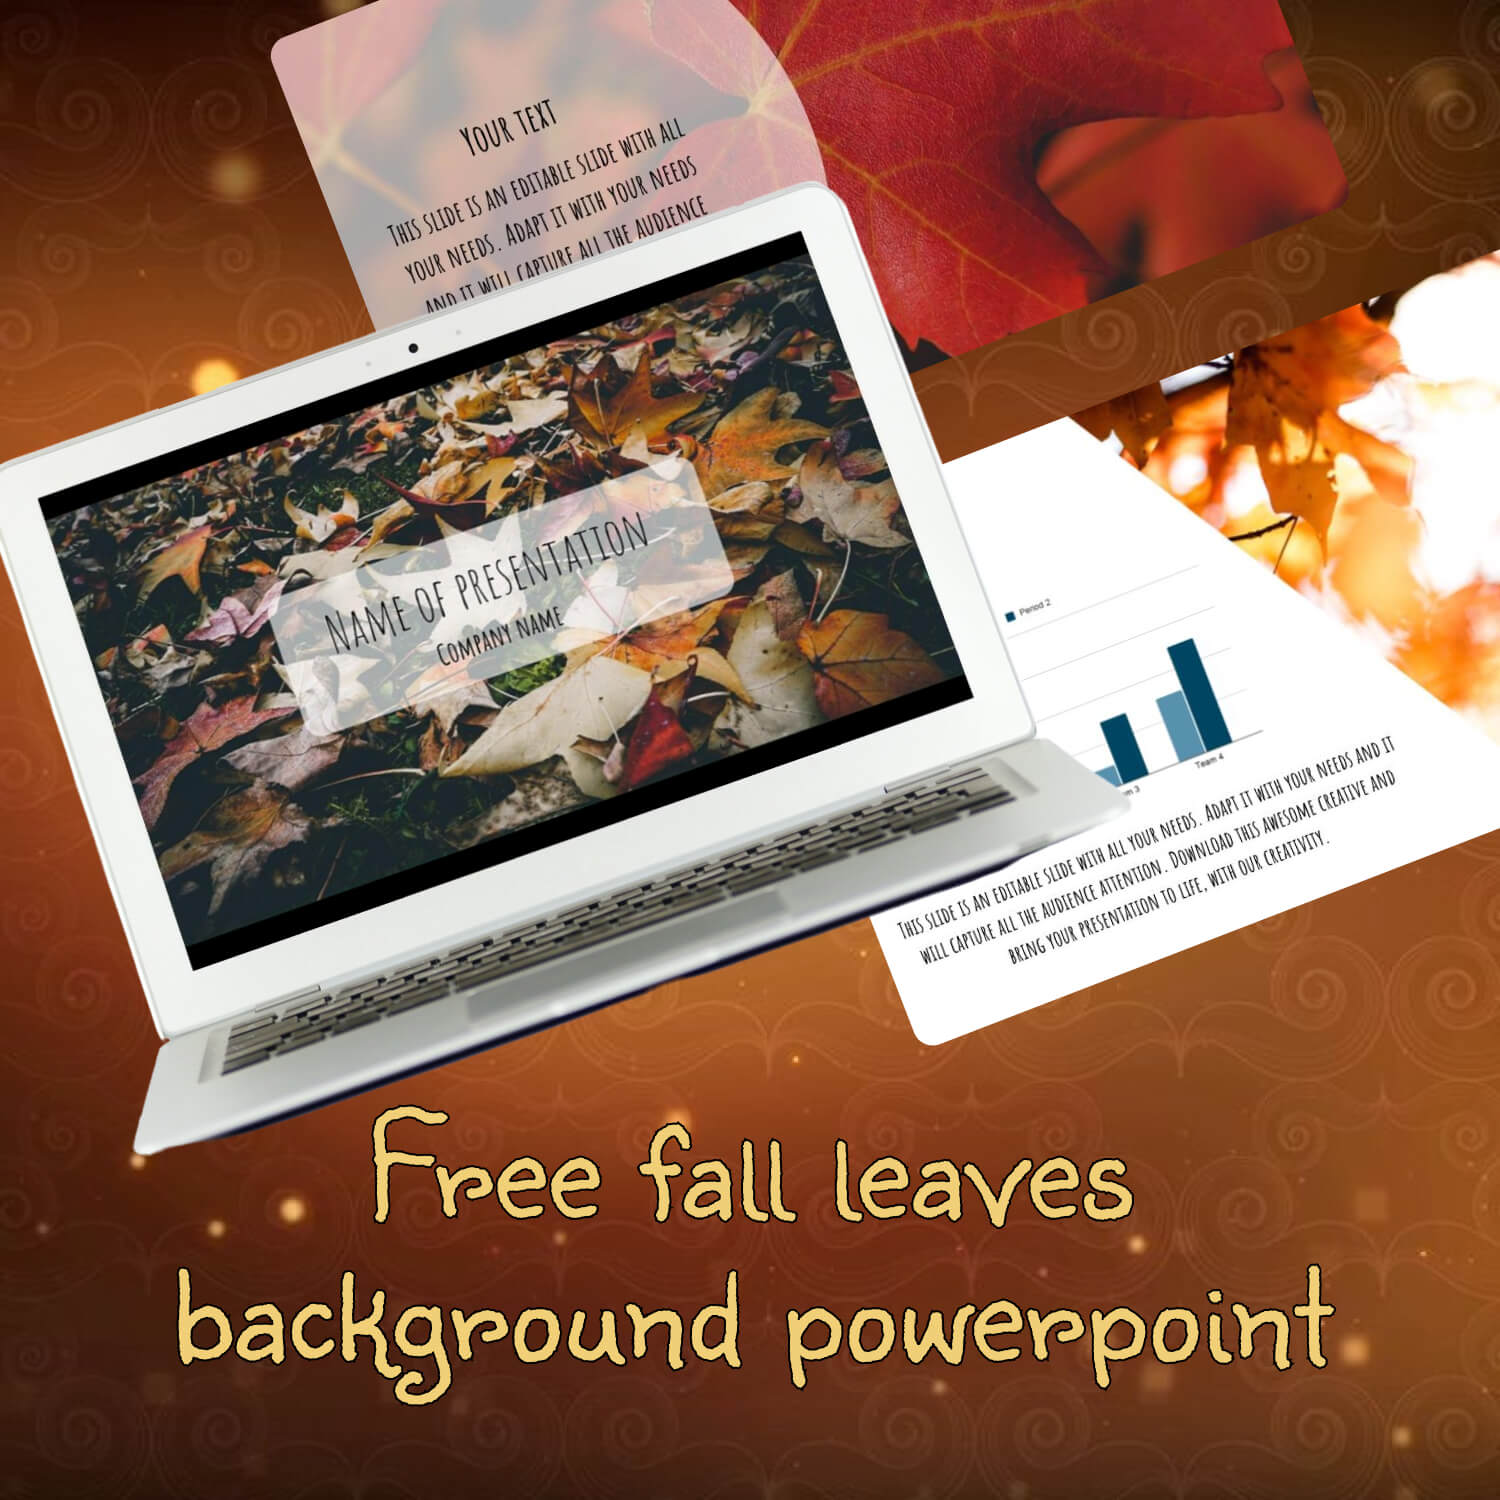 Free Fall Leaves Background Powerpoint.